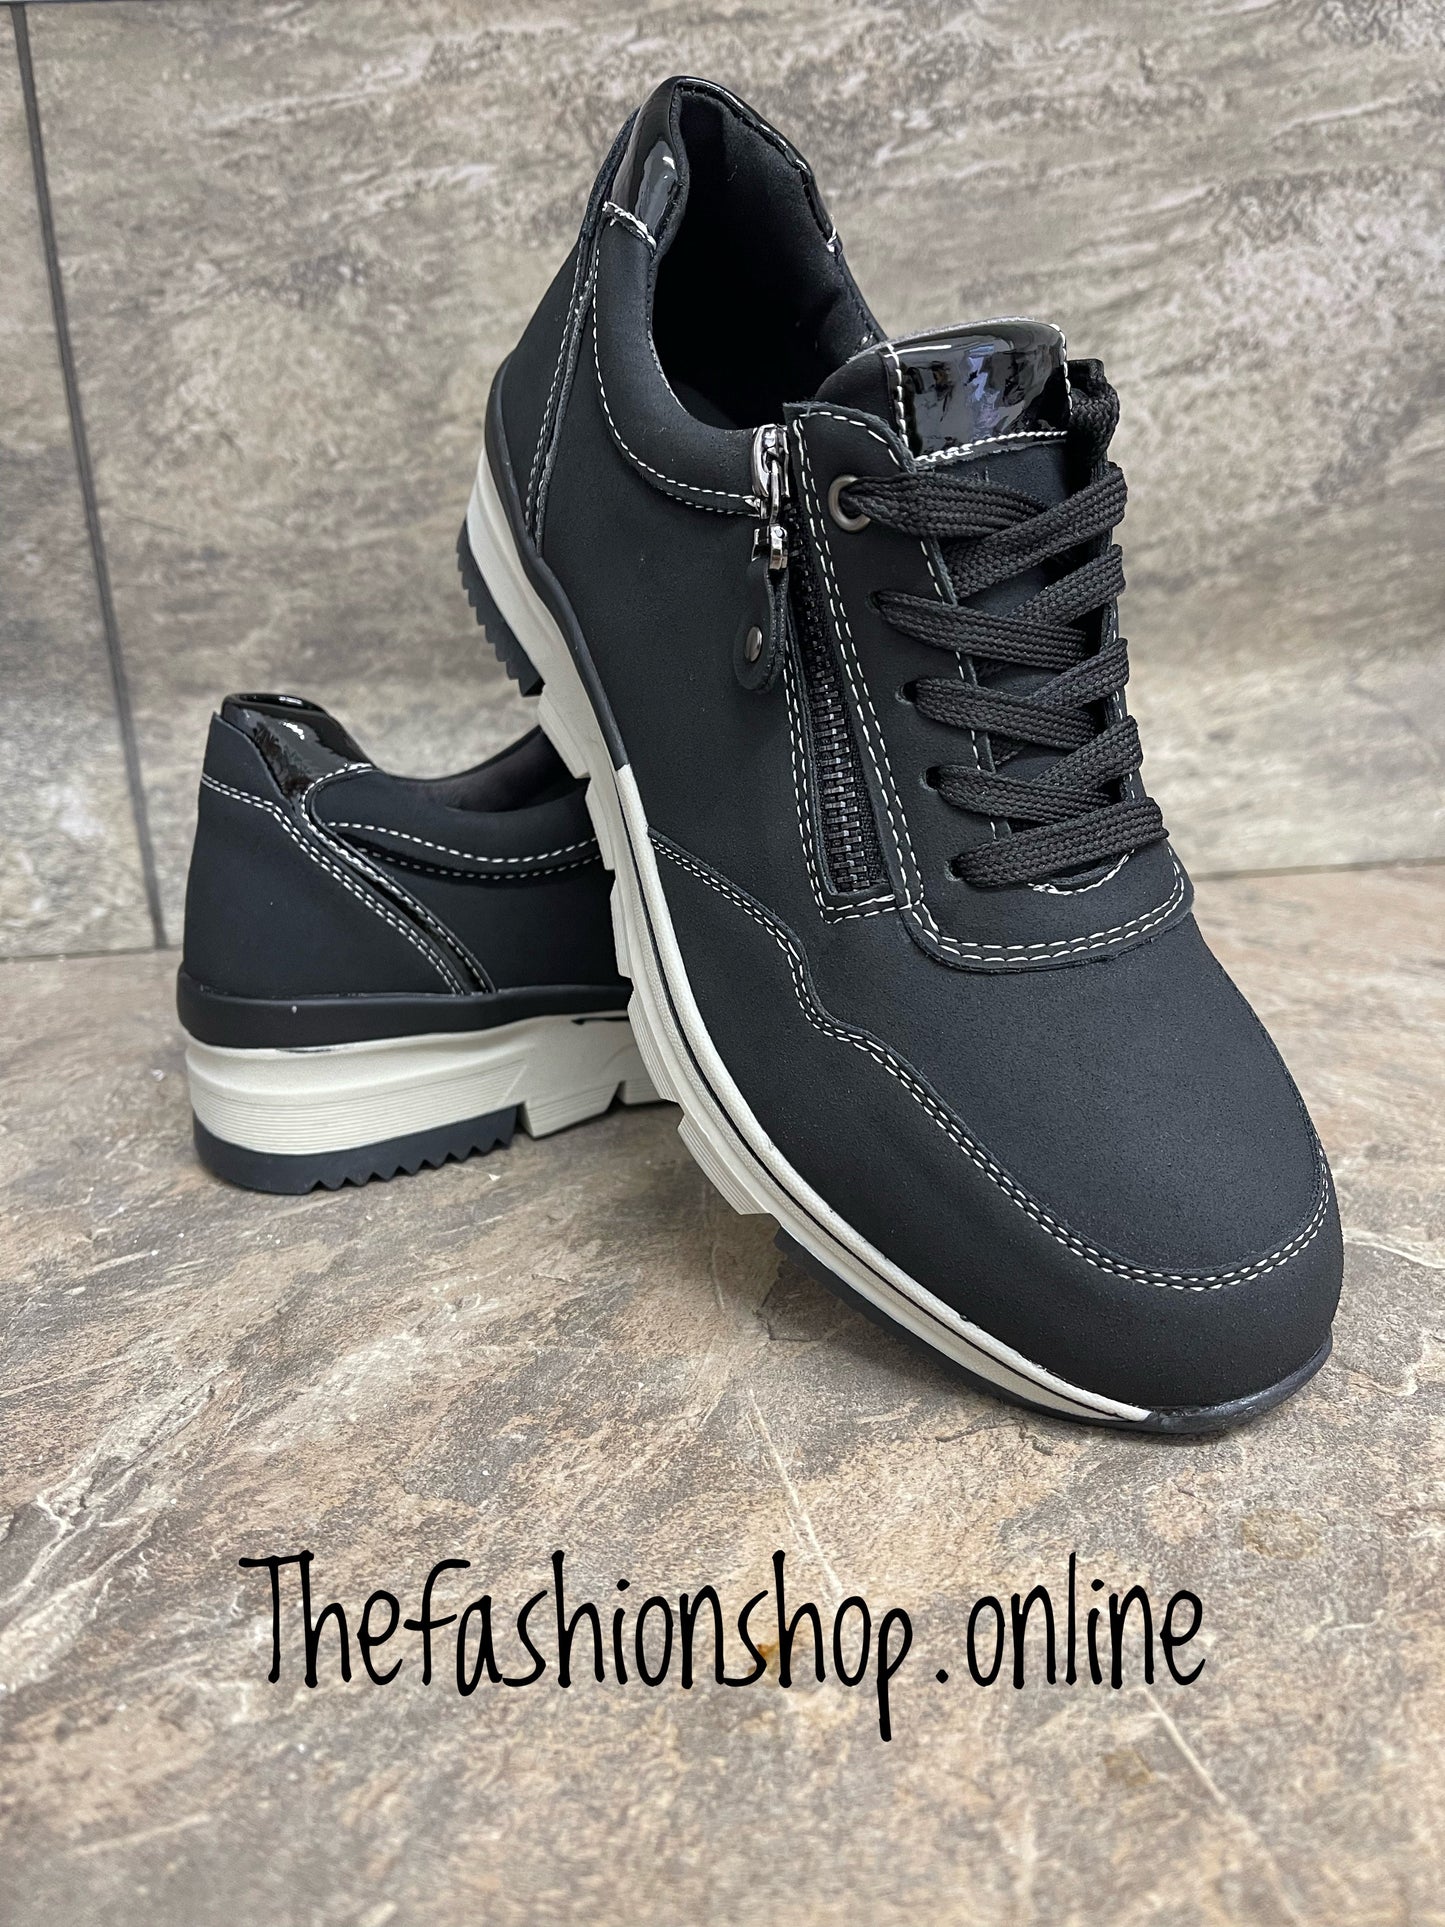 Black zip and lace trainer sizes 3-8